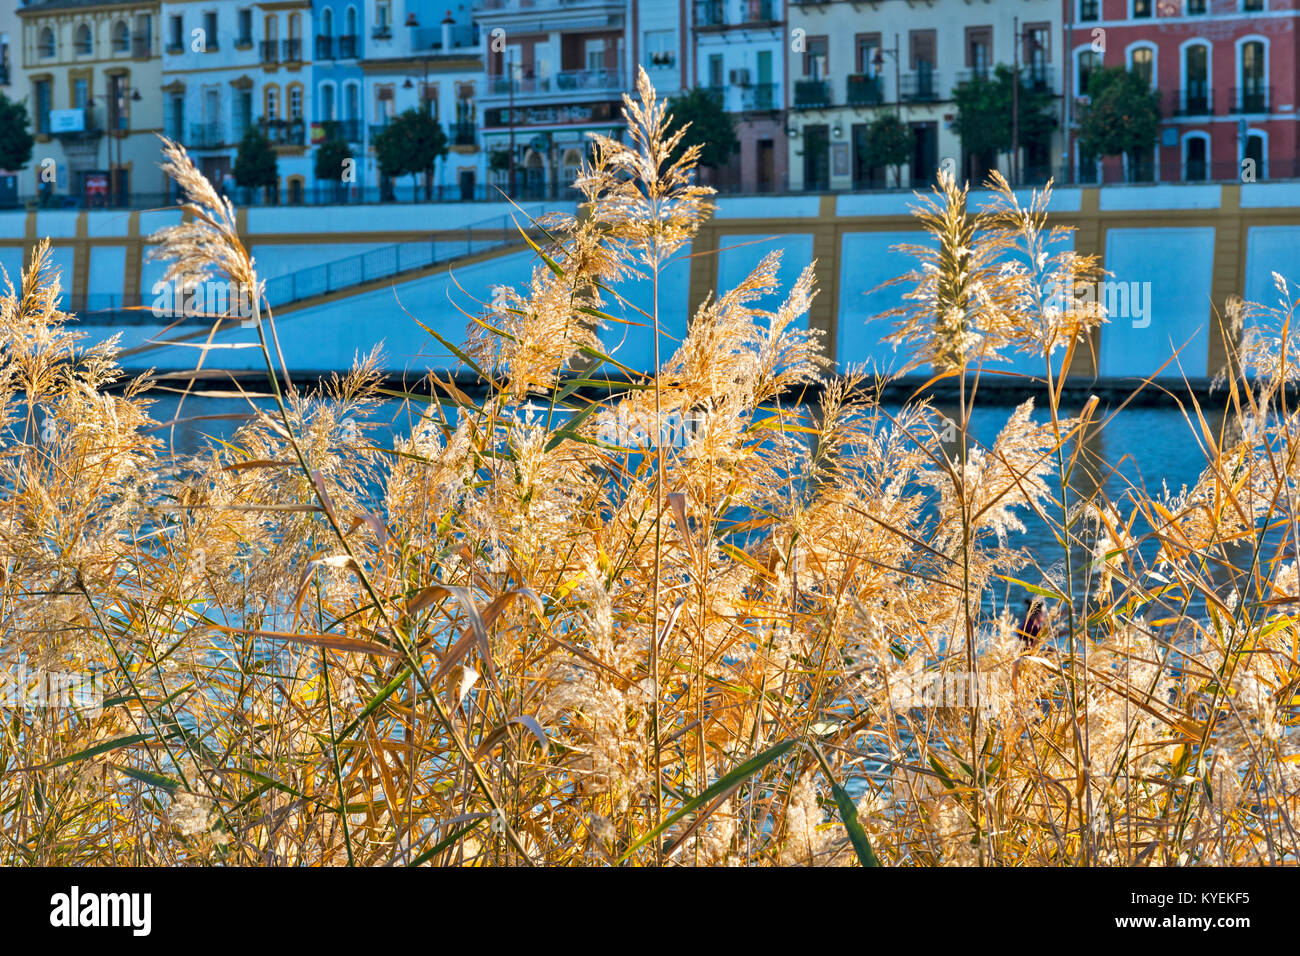 SEVILLE SPAIN GRASSES OR SEDGES GROWING ON THE BANKS OF THE RIVER GUADALQUIVIR NEAR THE PASSEO CRISTOBAL COLON Stock Photo